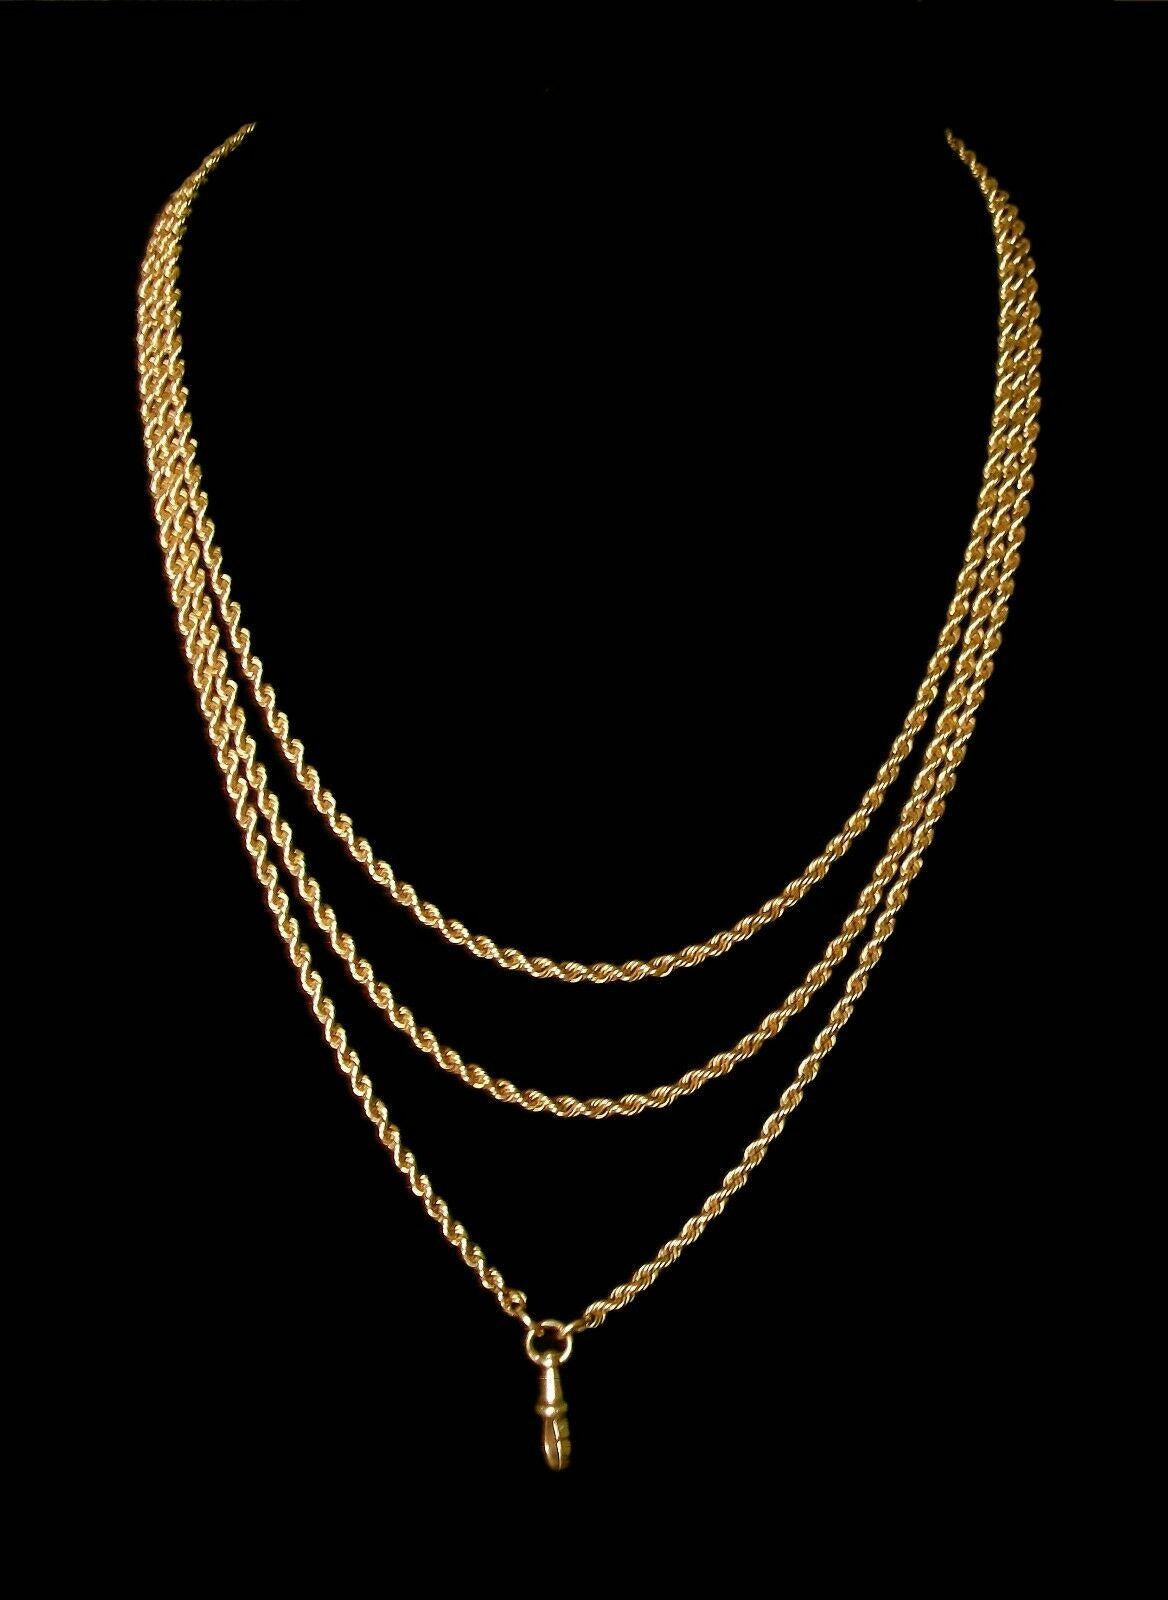 Extraordinary and rare extra long Victorian 12 Karat yellow gold rope twist pocket watch chain - now more commonly worn (with or without a pendant/fob) as a triple strand gold chain necklace - finest craftsmanship - original pocket watch hook with